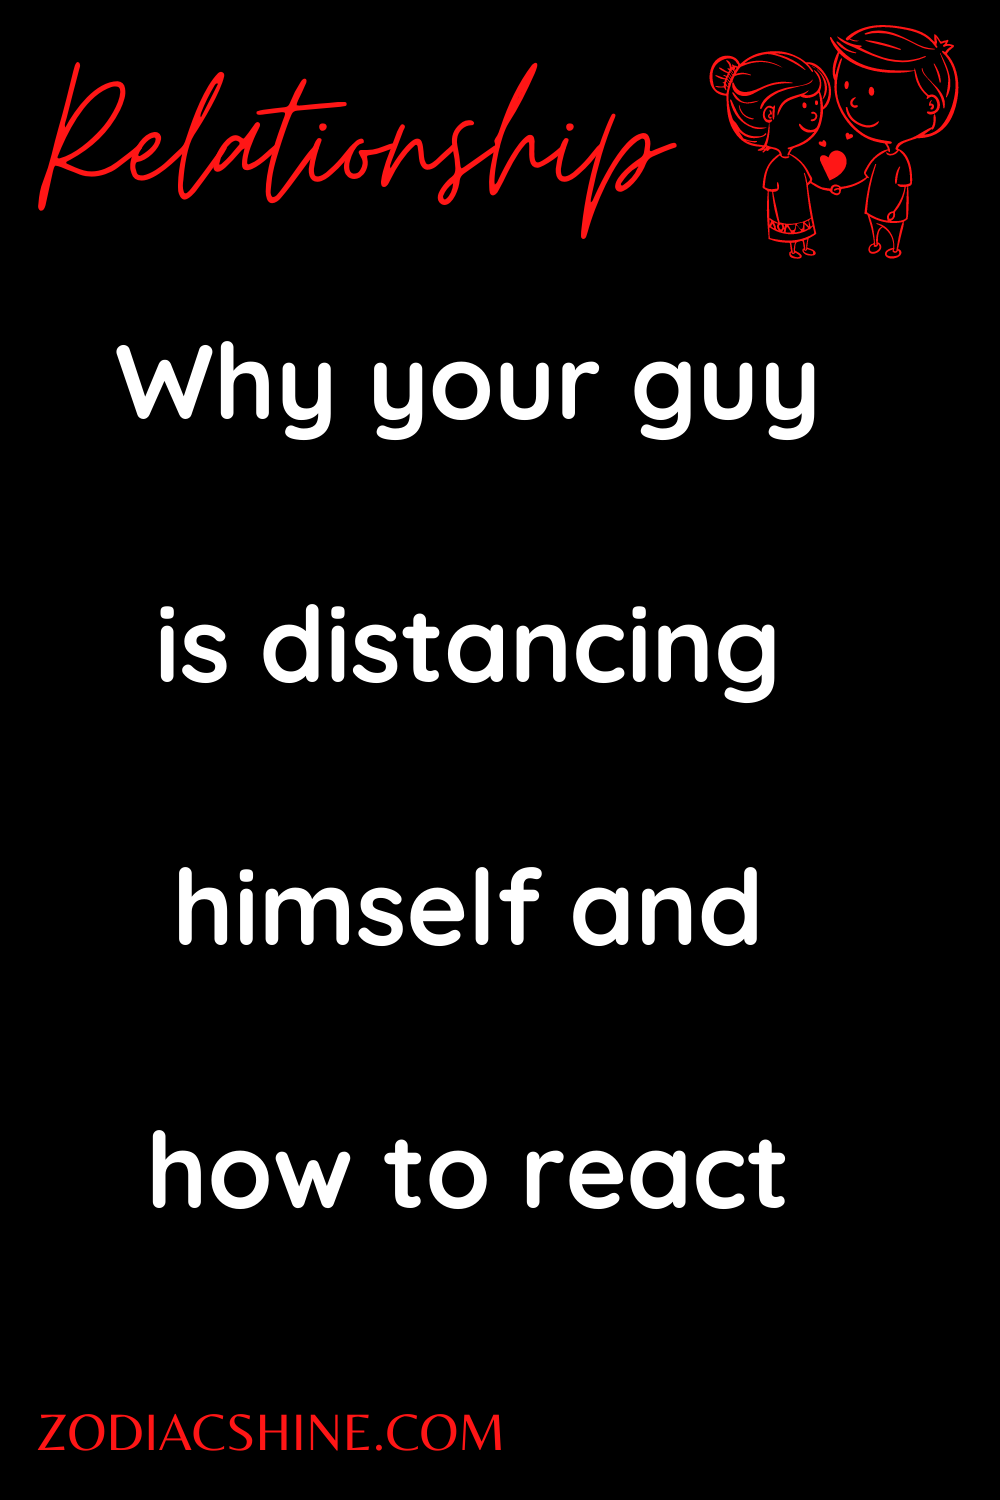 Why your guy is distancing himself and how to react